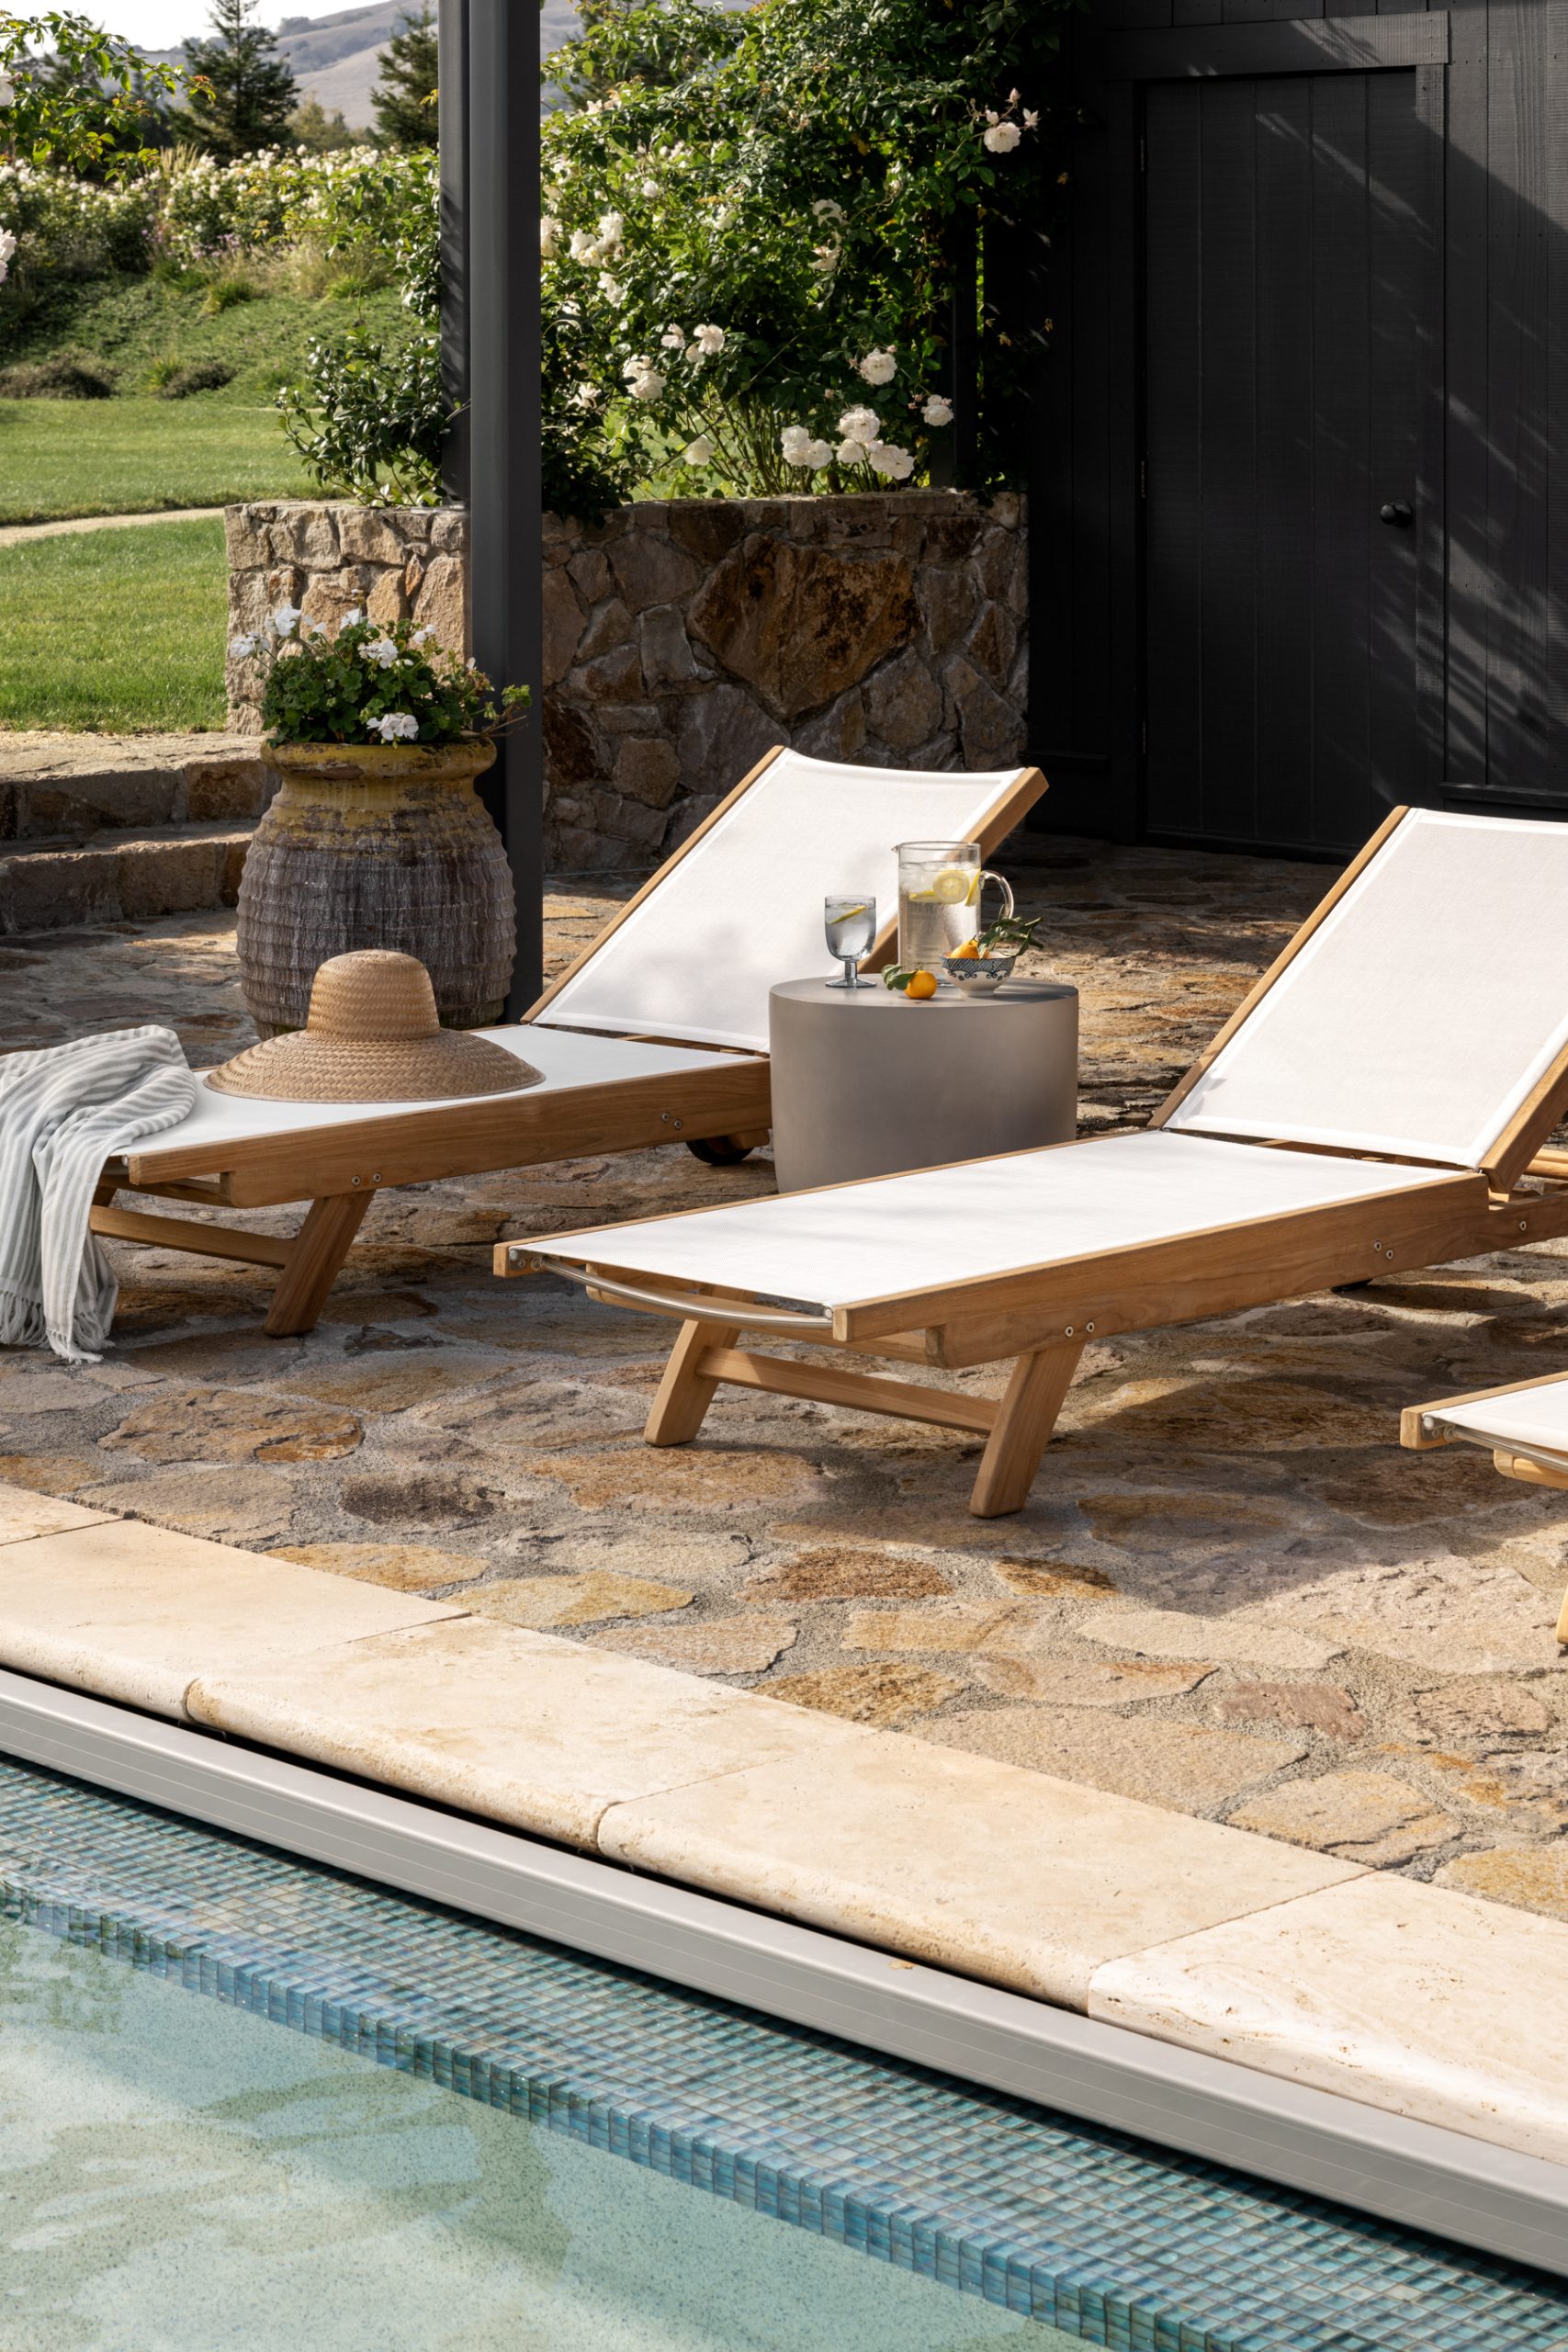 Teak outdoor chaise lounge chairs by the pool